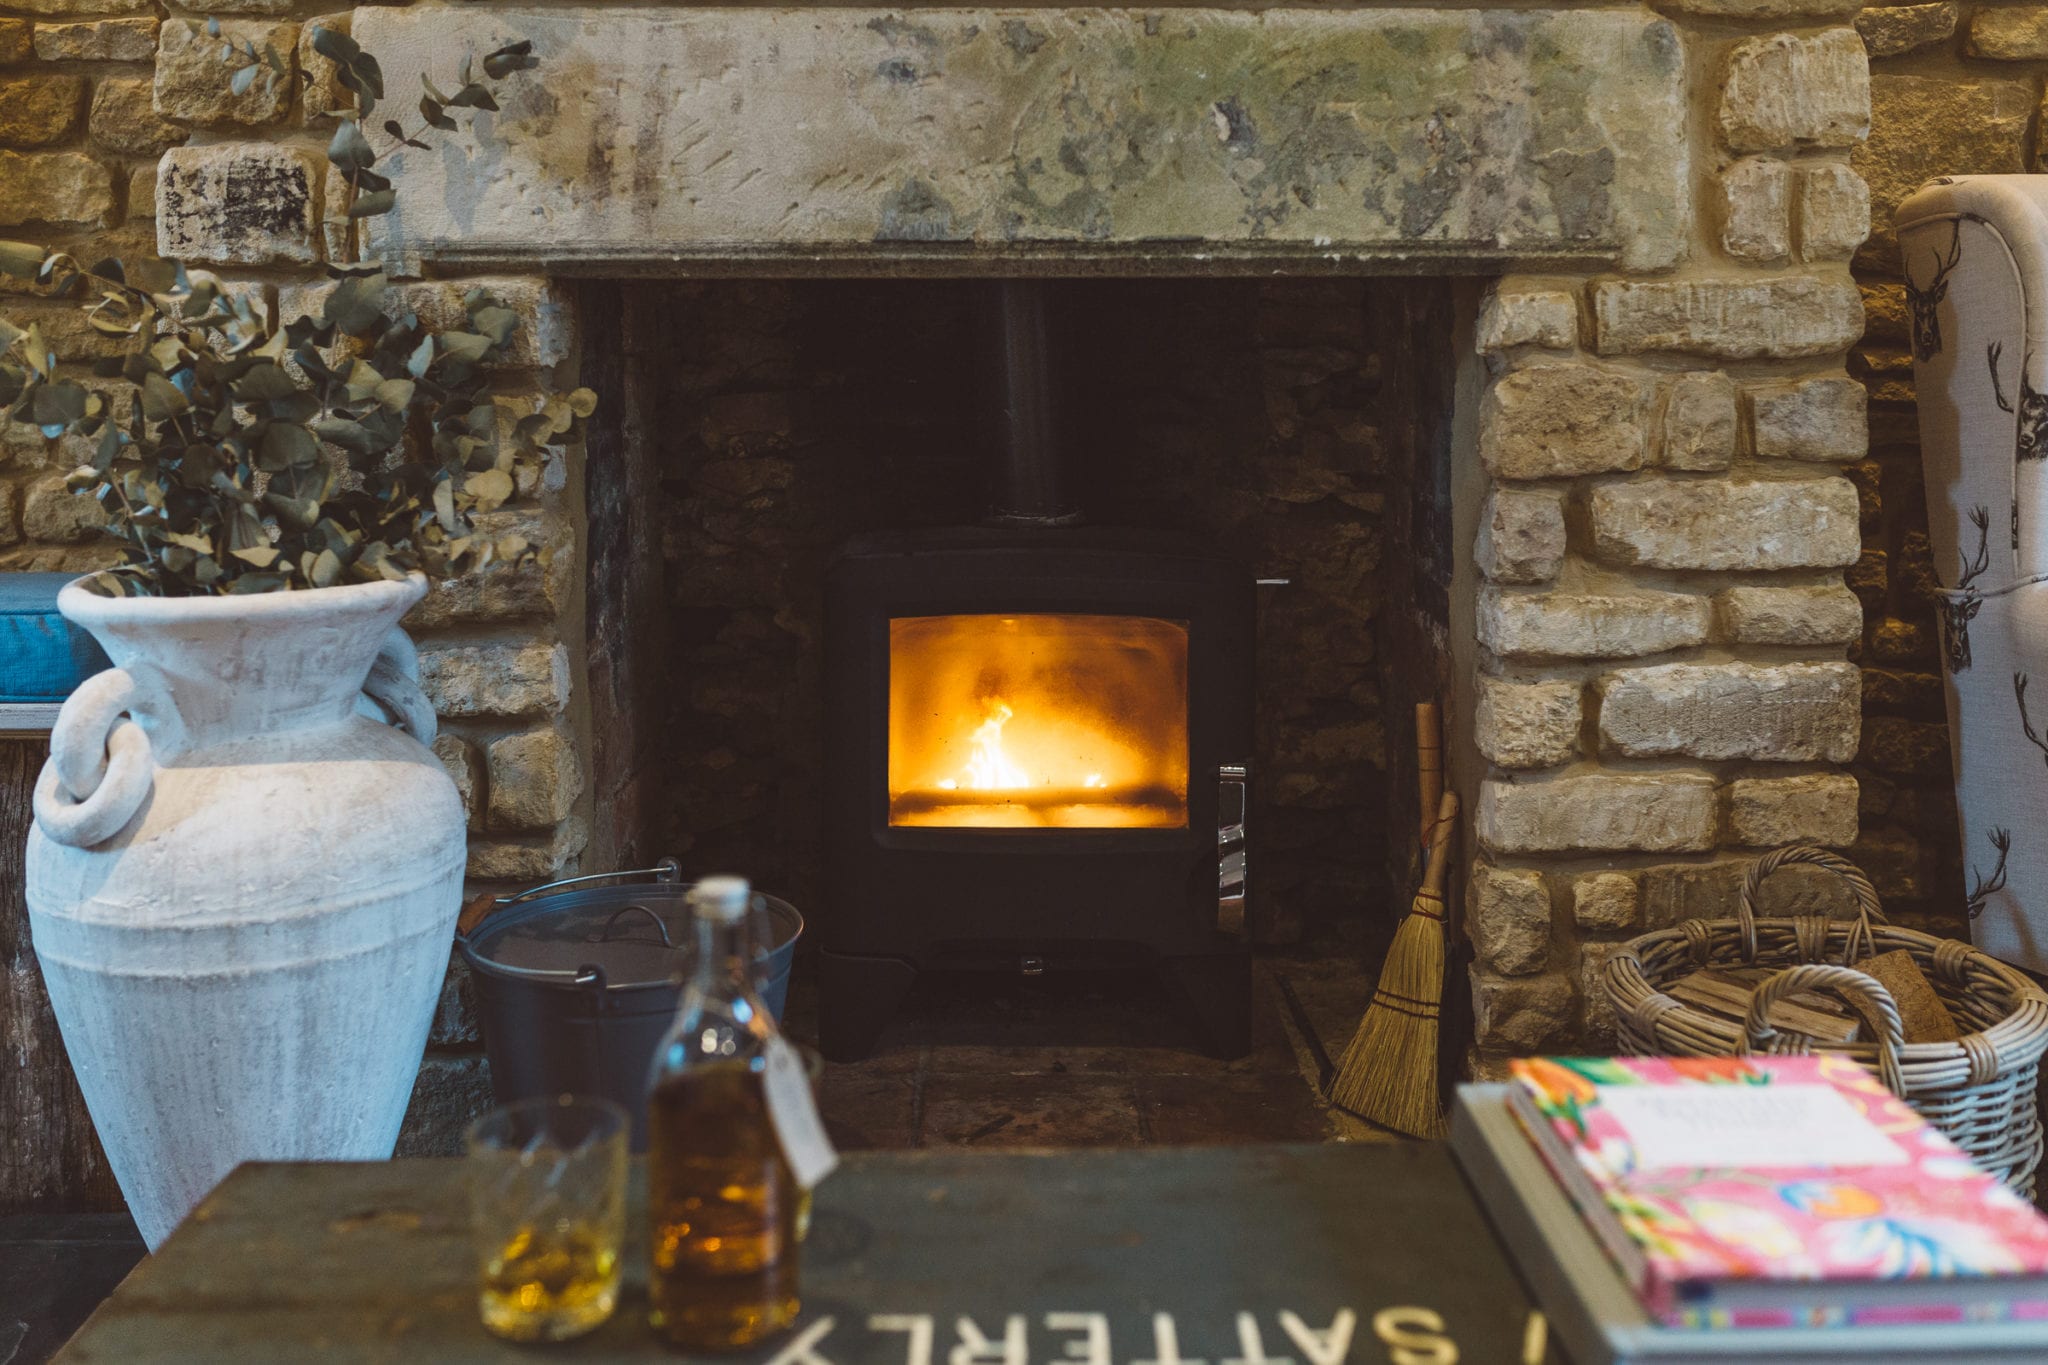 A woodburner fireplace in a quaint old cottage